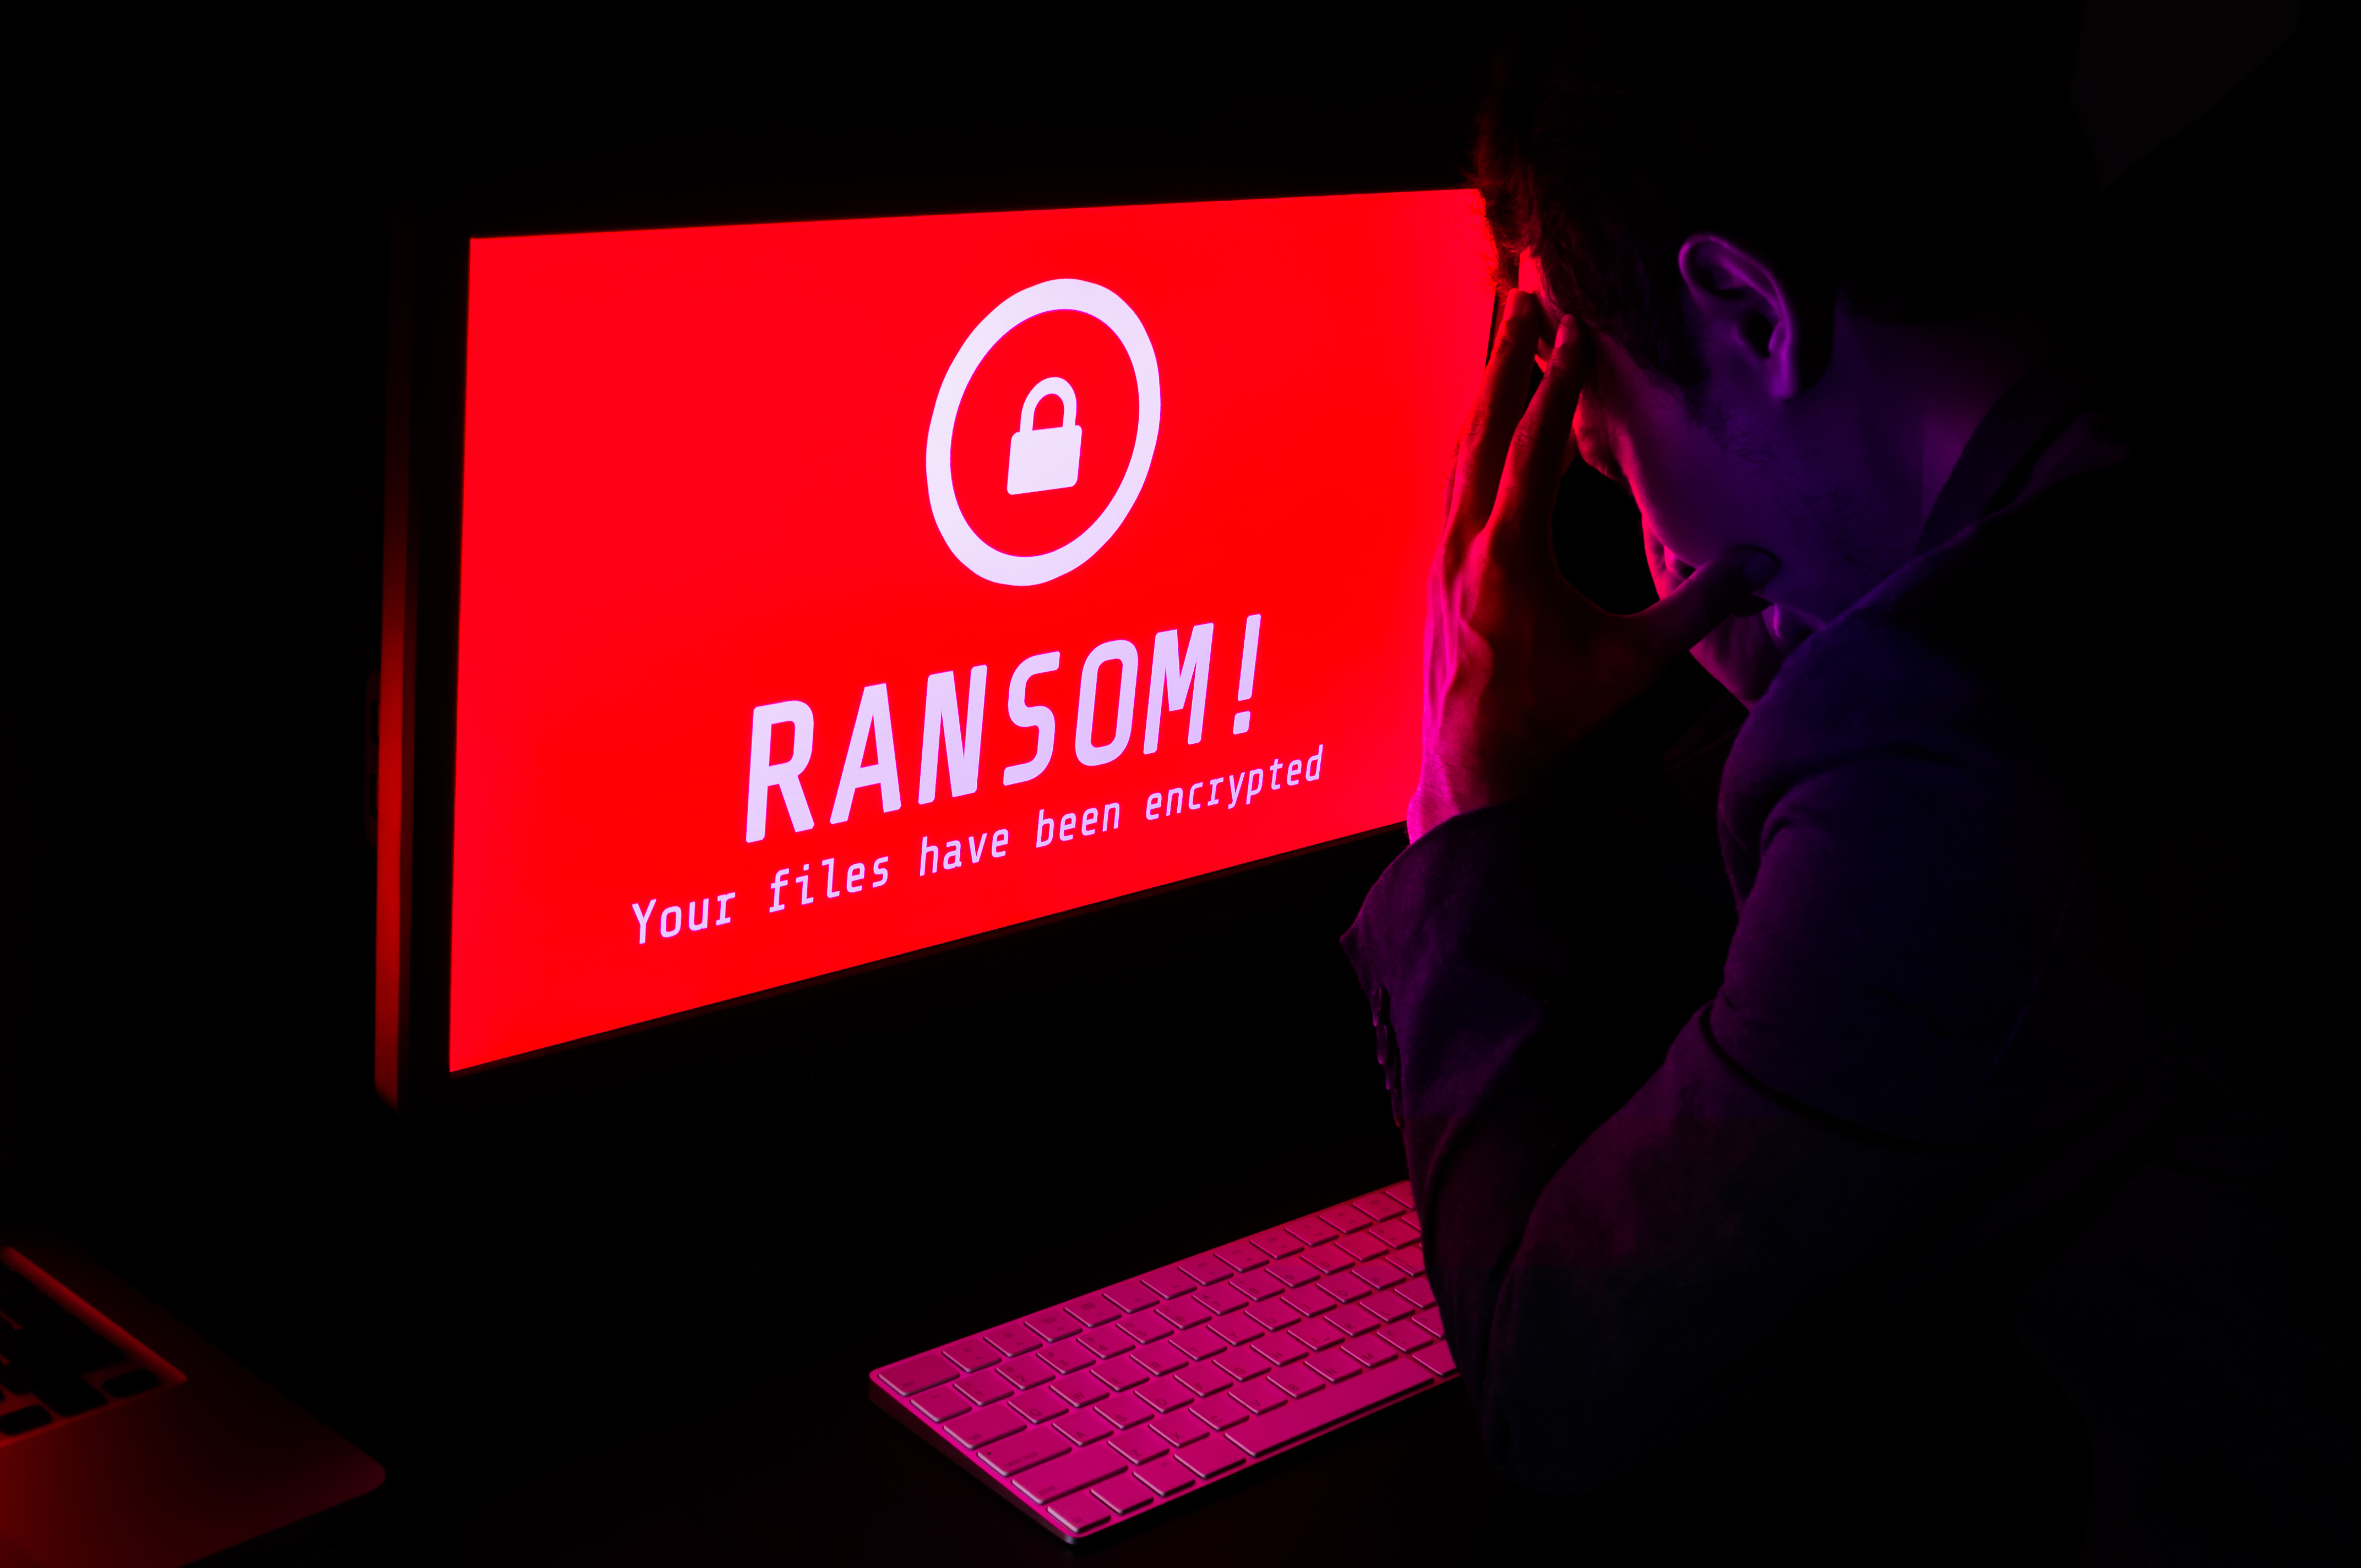  SMB_cybersecurity_action_7_reasons_ransomware